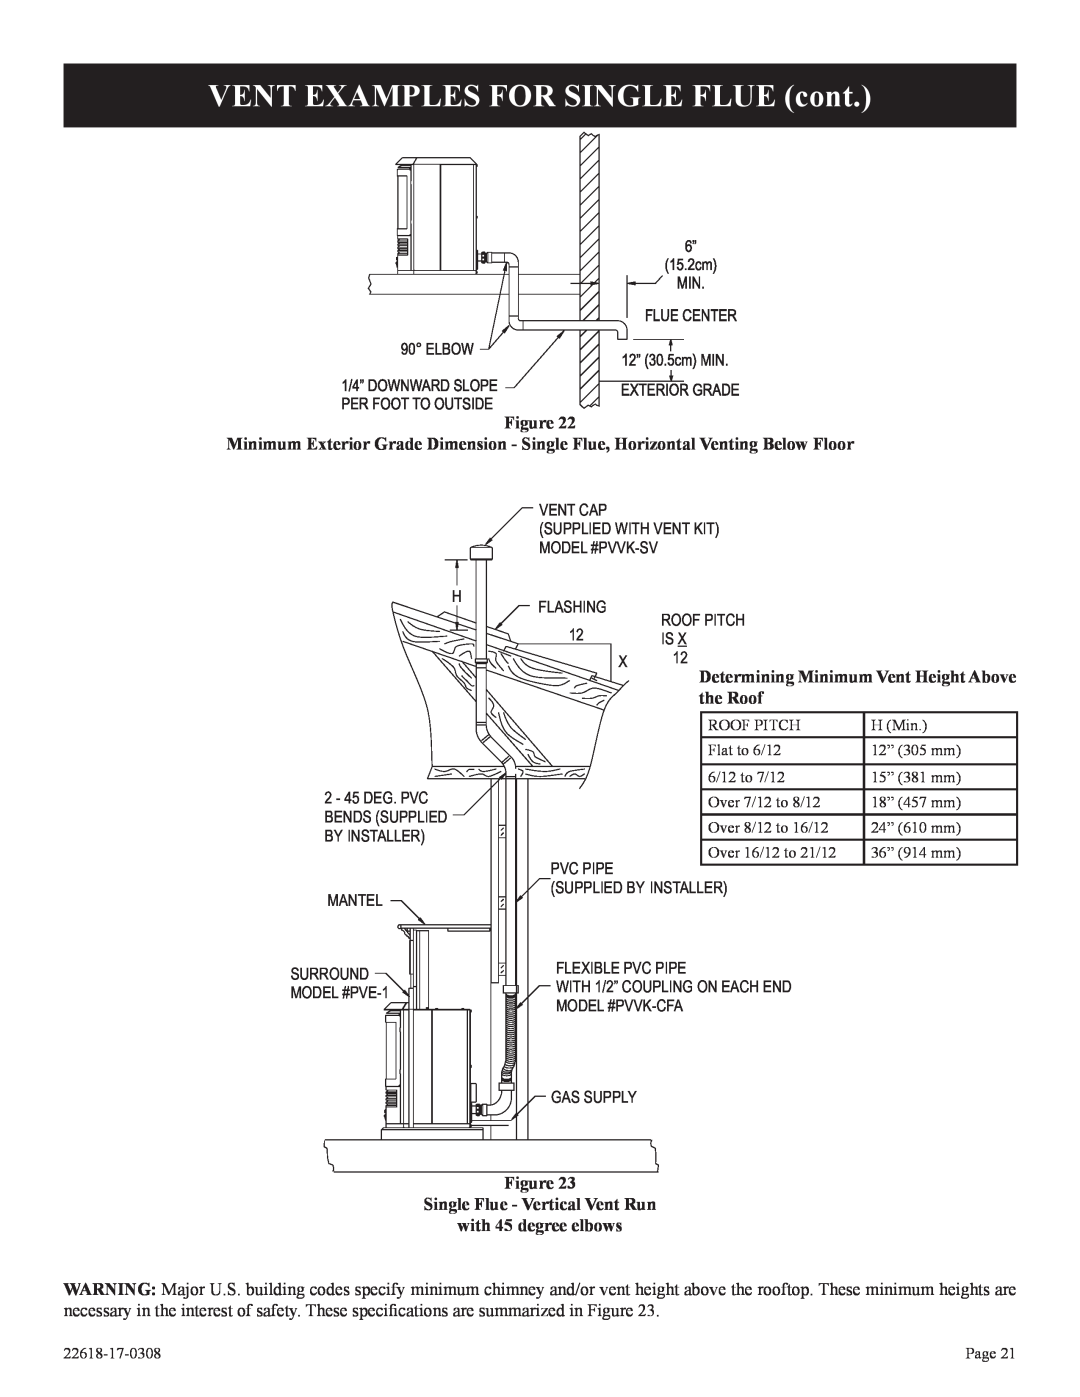 Empire Comfort Systems GP)-1, GN, BP)-1 VENT EXAMPLES FOR SINGLE FLUE cont, Determining Minimum Vent Height Above, the Roof 